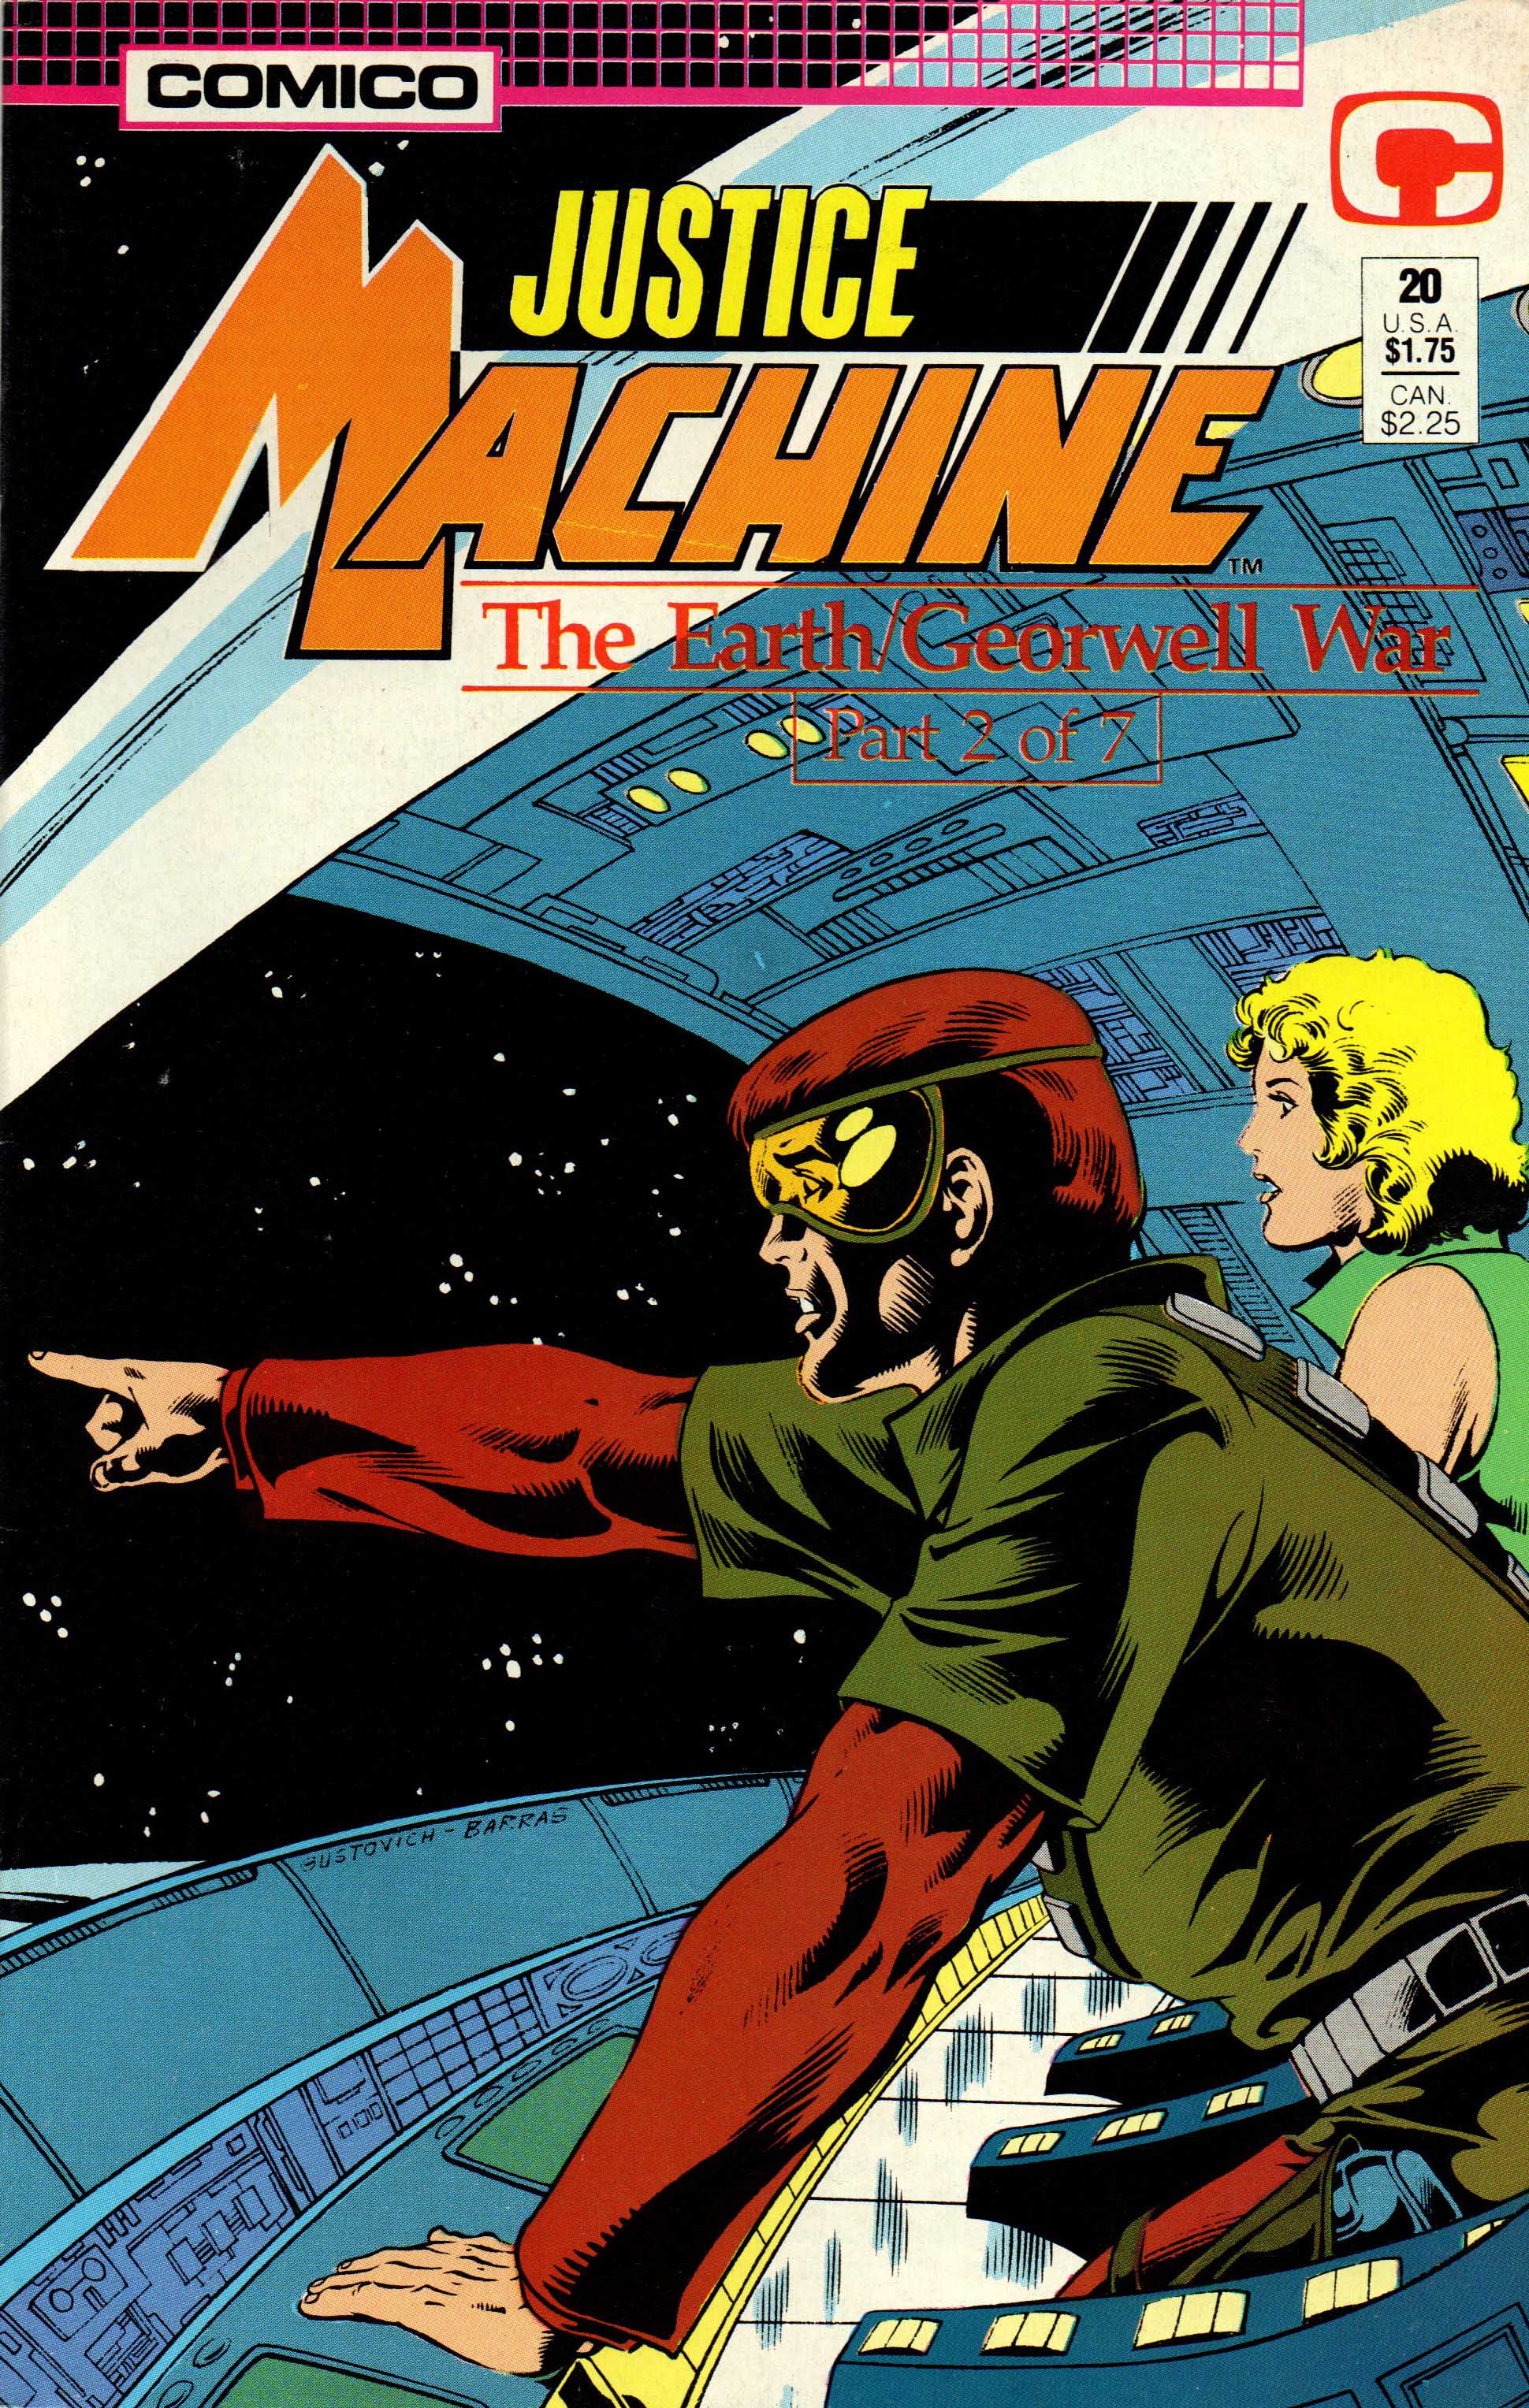 Read online Justice Machine comic -  Issue #20 - 1